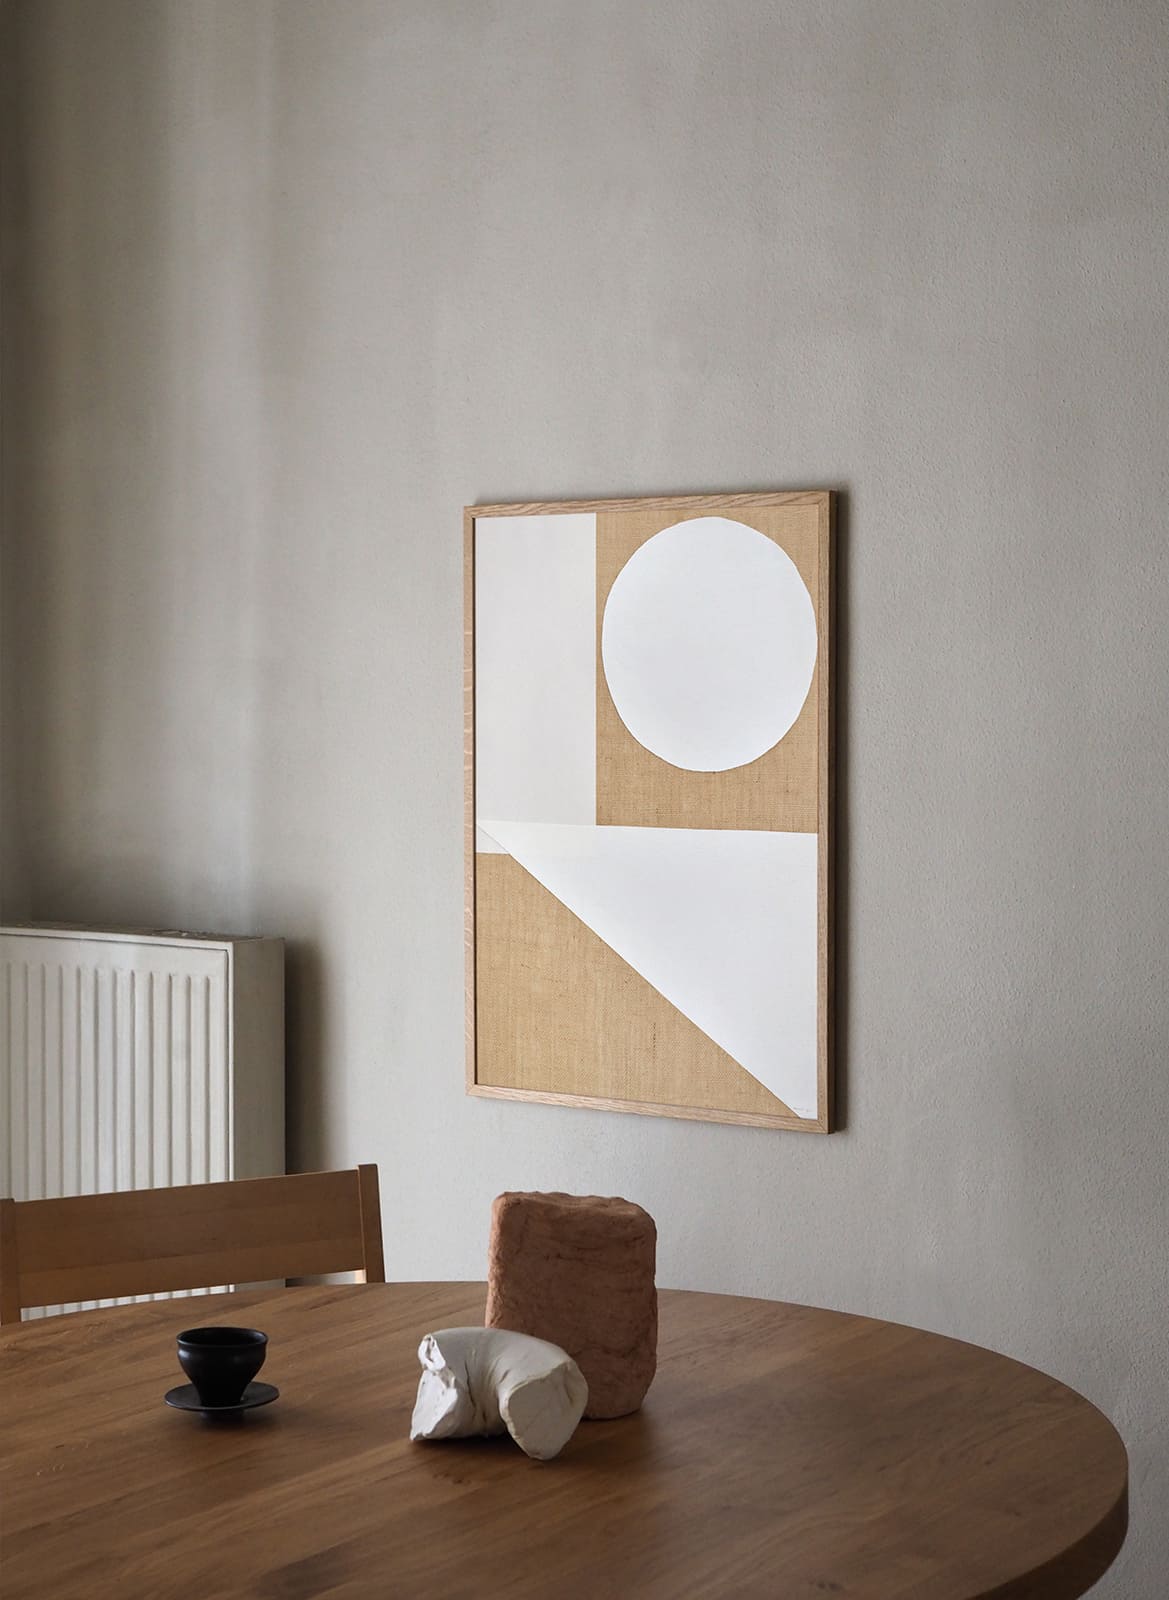  Framed geometrical poster hanging above dining table by Atelier Cph